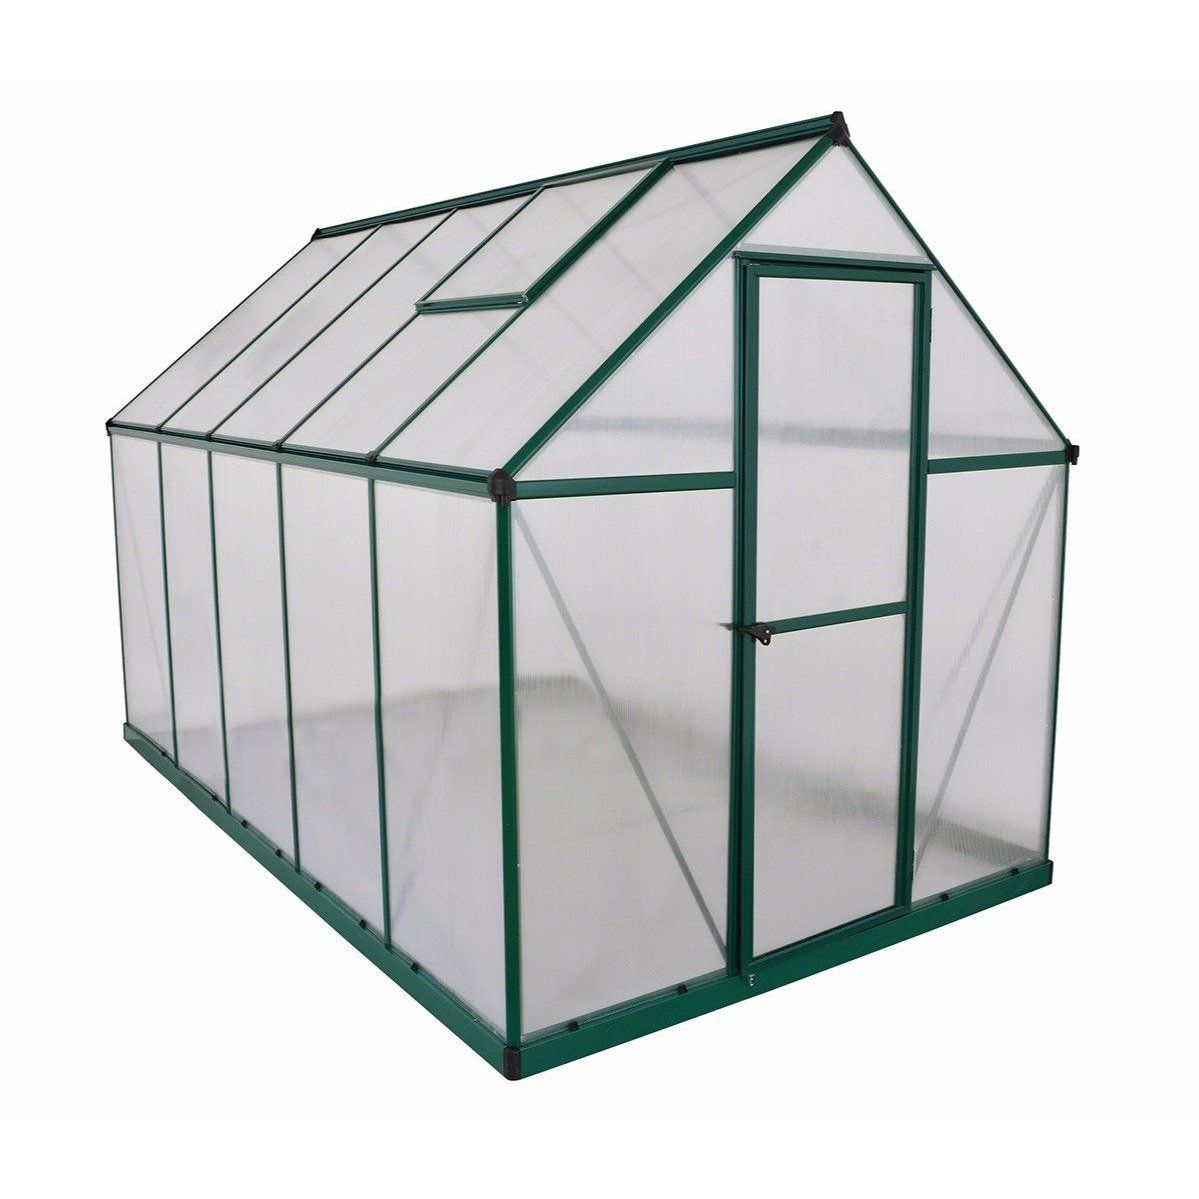 Palram Canopia Mythos 6x10 Green Greenhouse with Twin wall panels